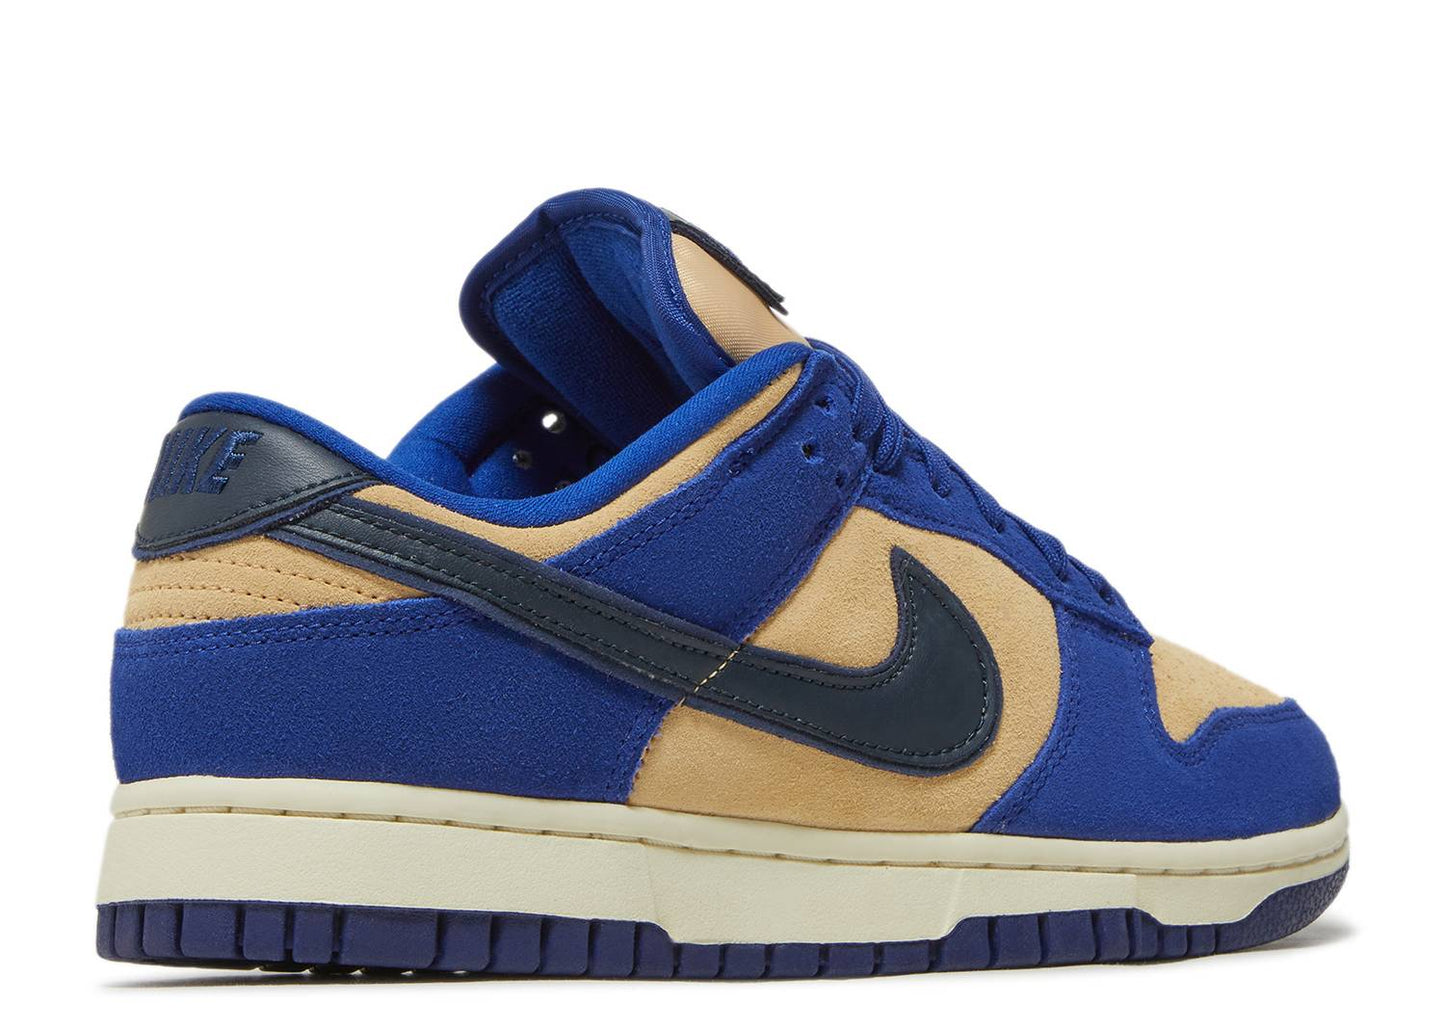 Nike Dunks Low Blue Suede (WMNS)